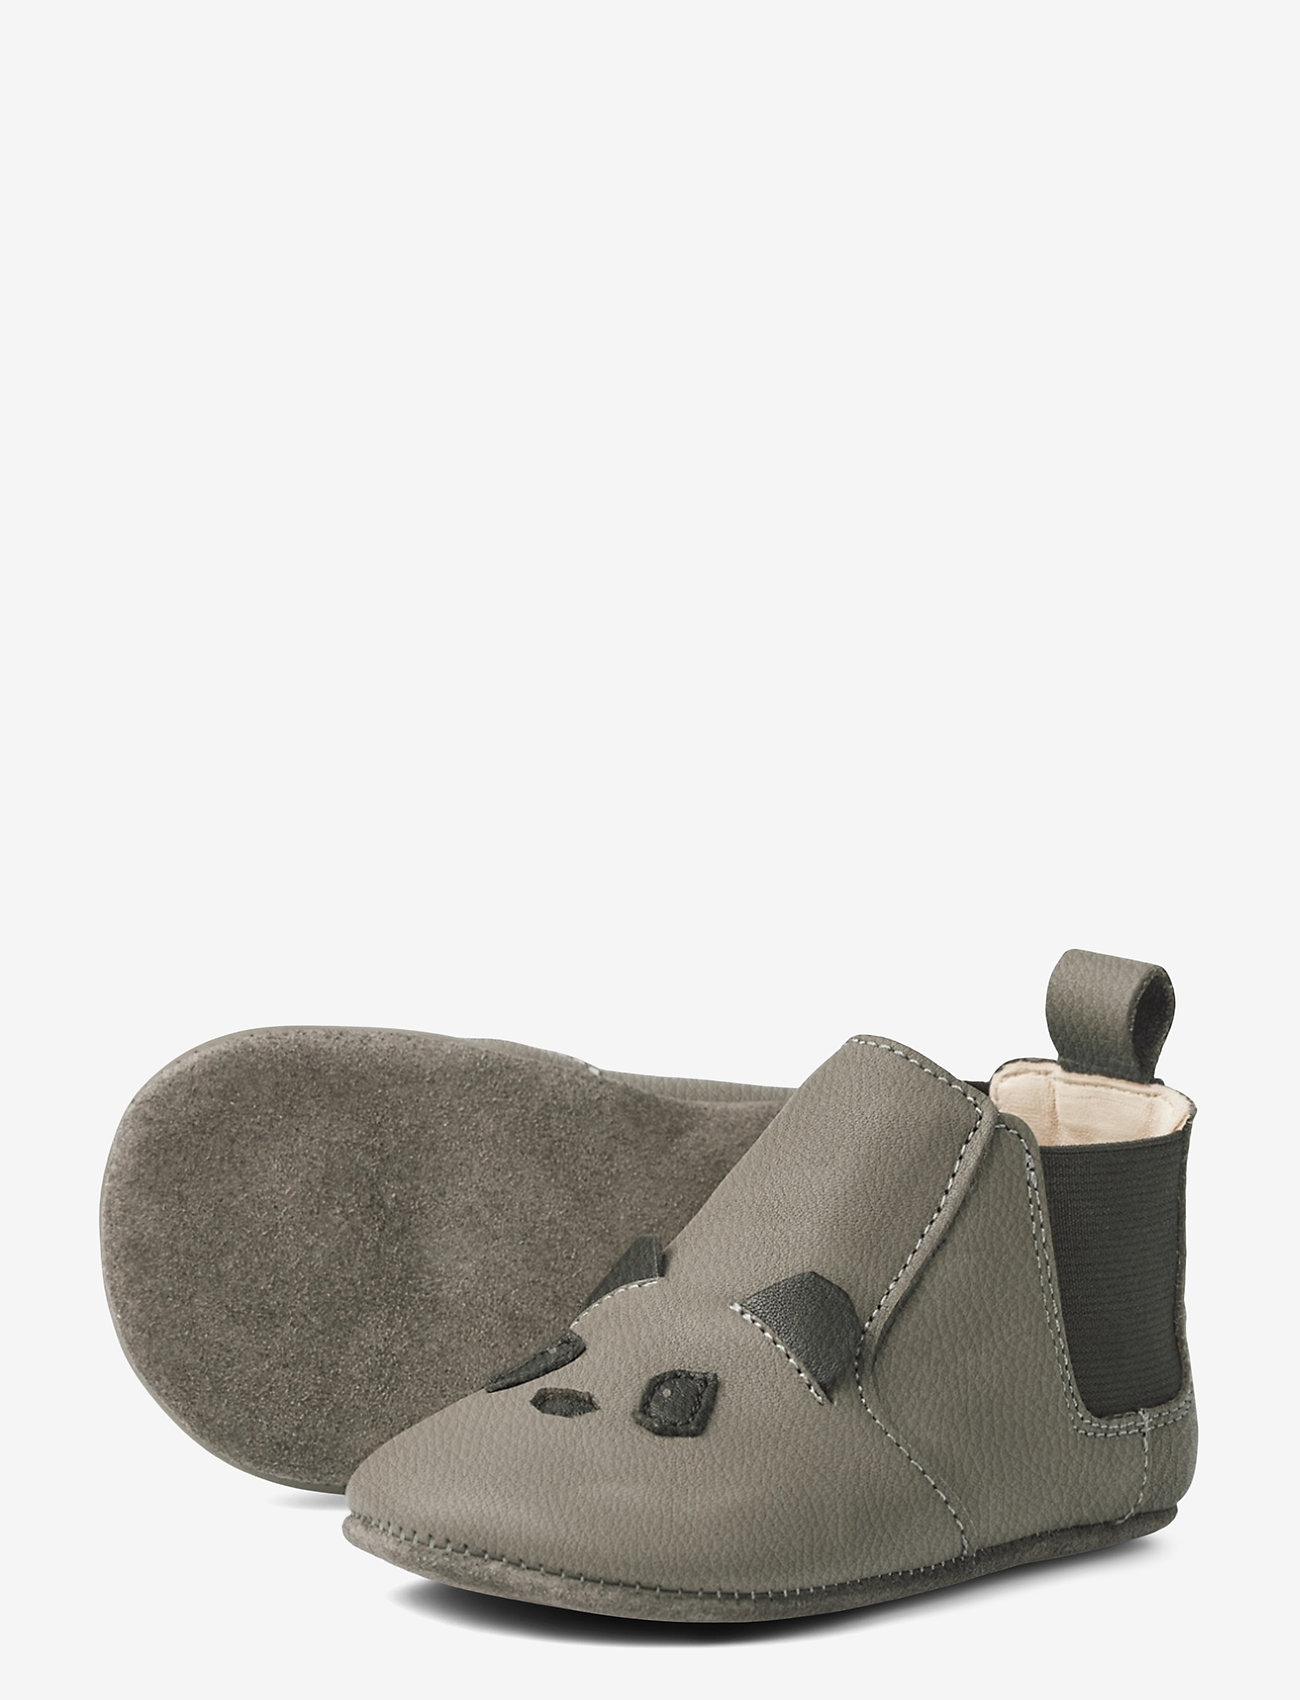 Liewood - Edith leather slippers - slippers - panda grey - 1